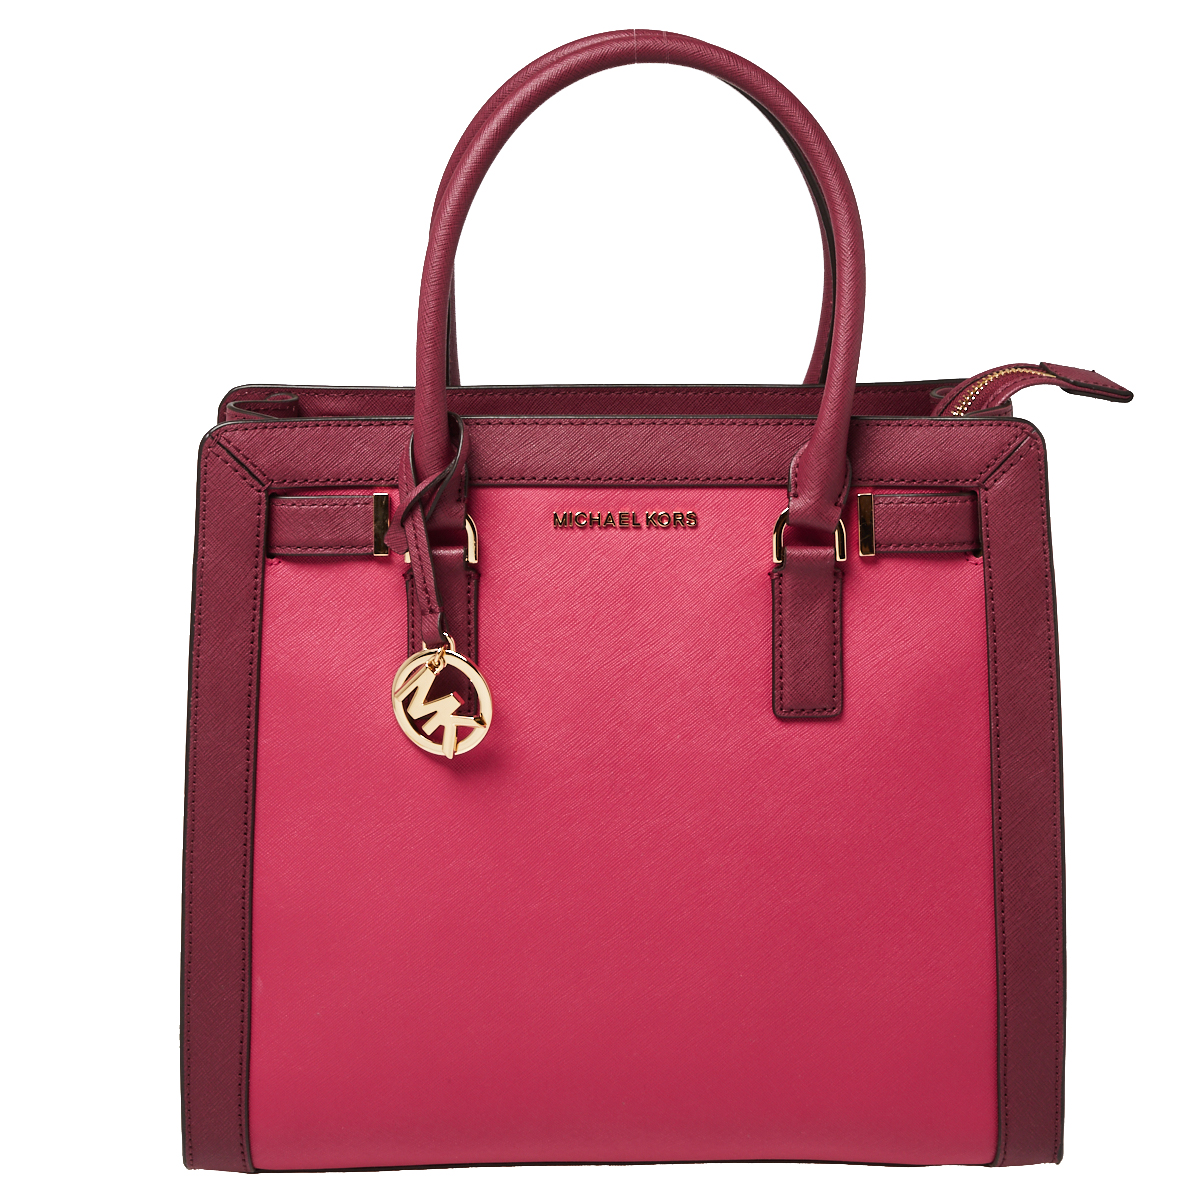 Michael Kors Raspberry/Red Leather Dillon Tote